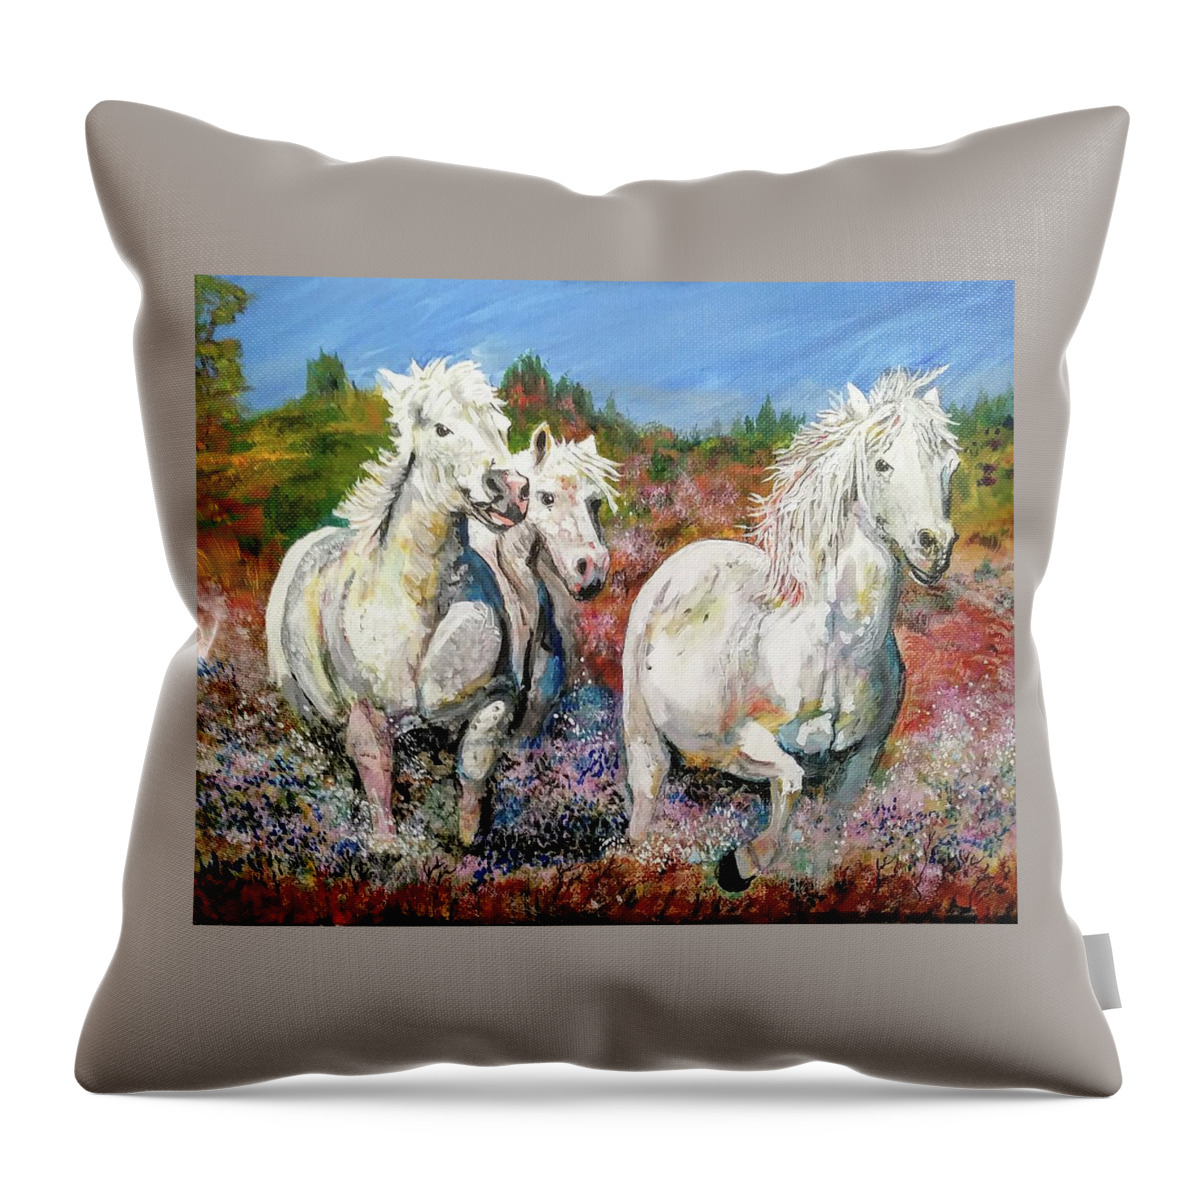 Horses Throw Pillow featuring the painting Running Wild by Mike Benton